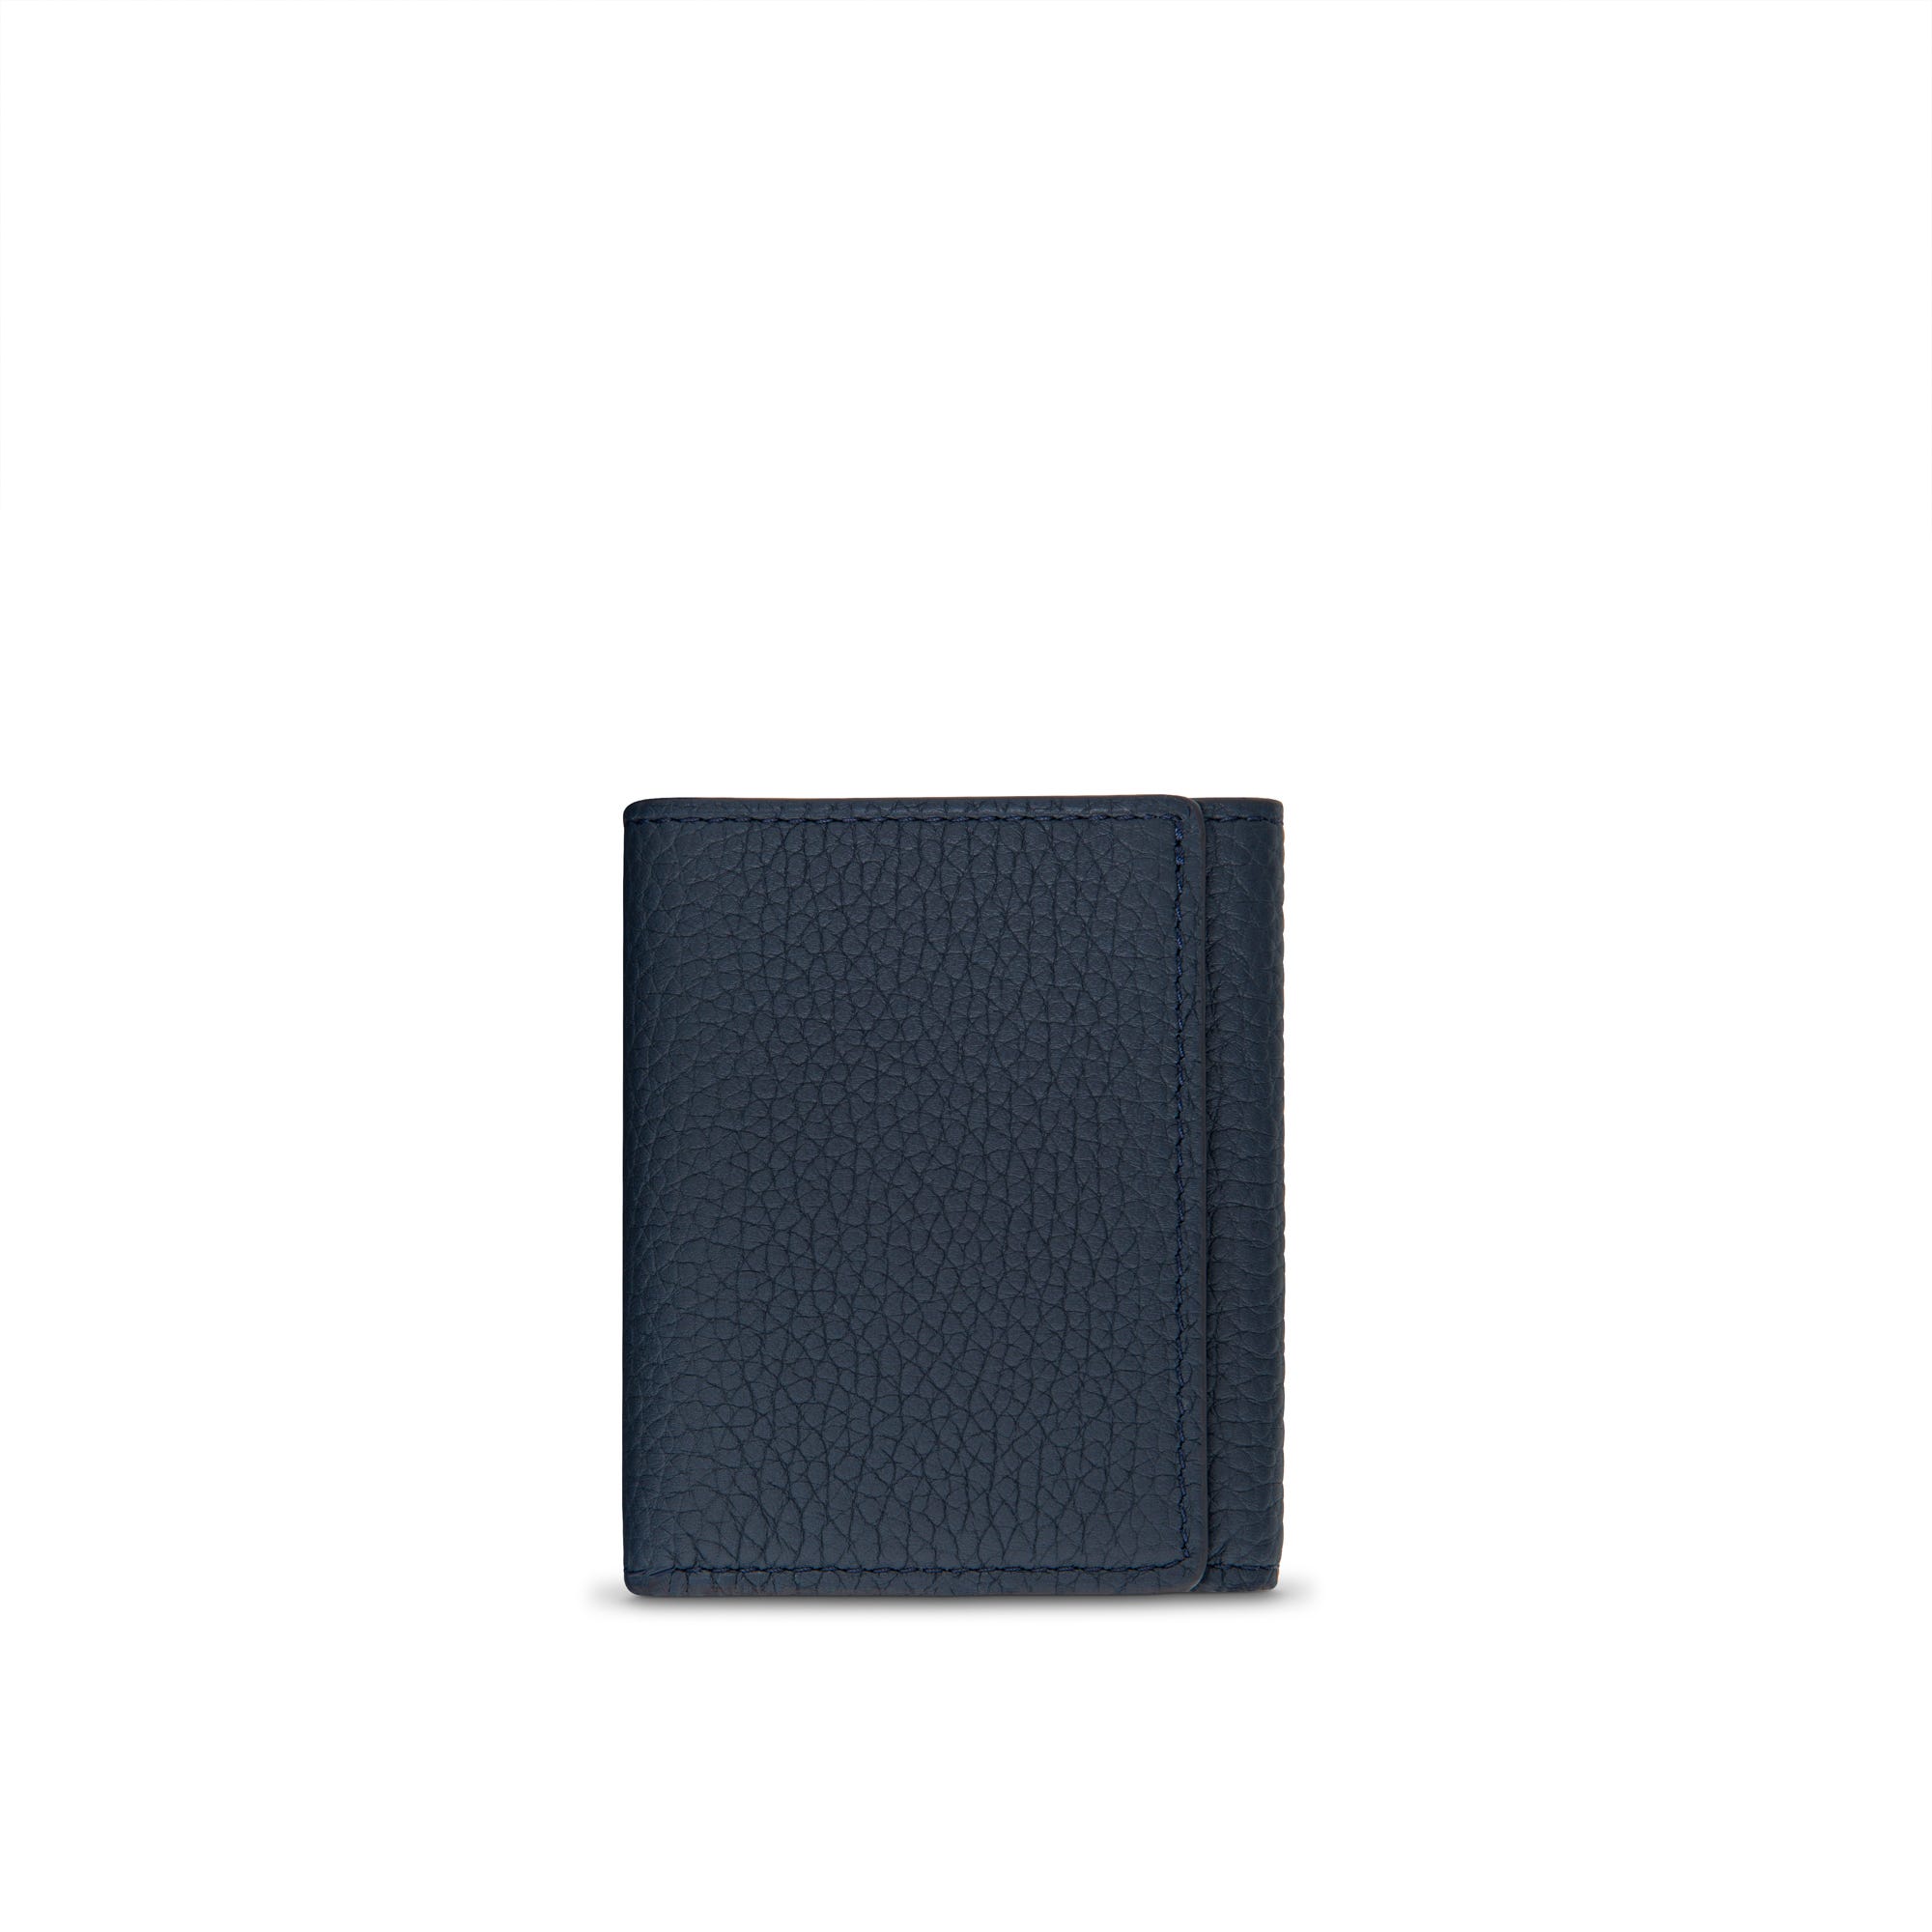 GMT Trifold Wallet in Navy Soft Grain Leather